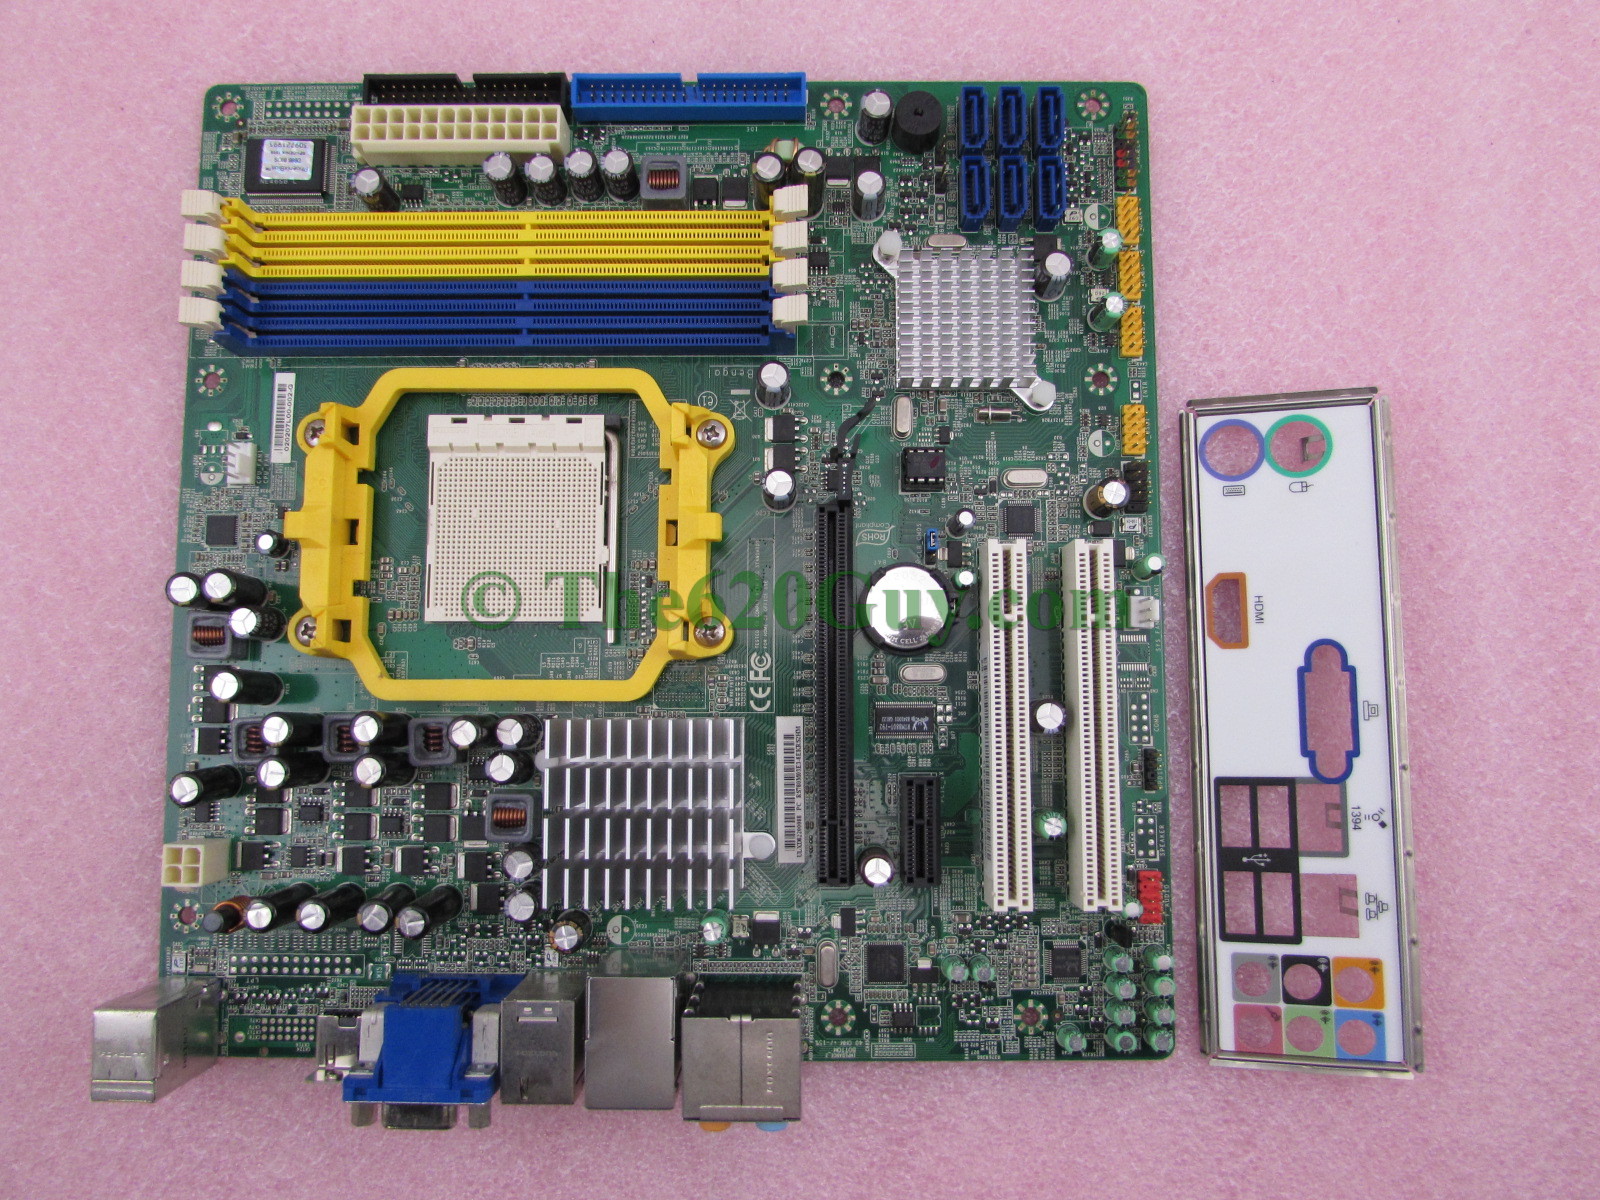 Acer Bengal Motherboard Manual download free, software